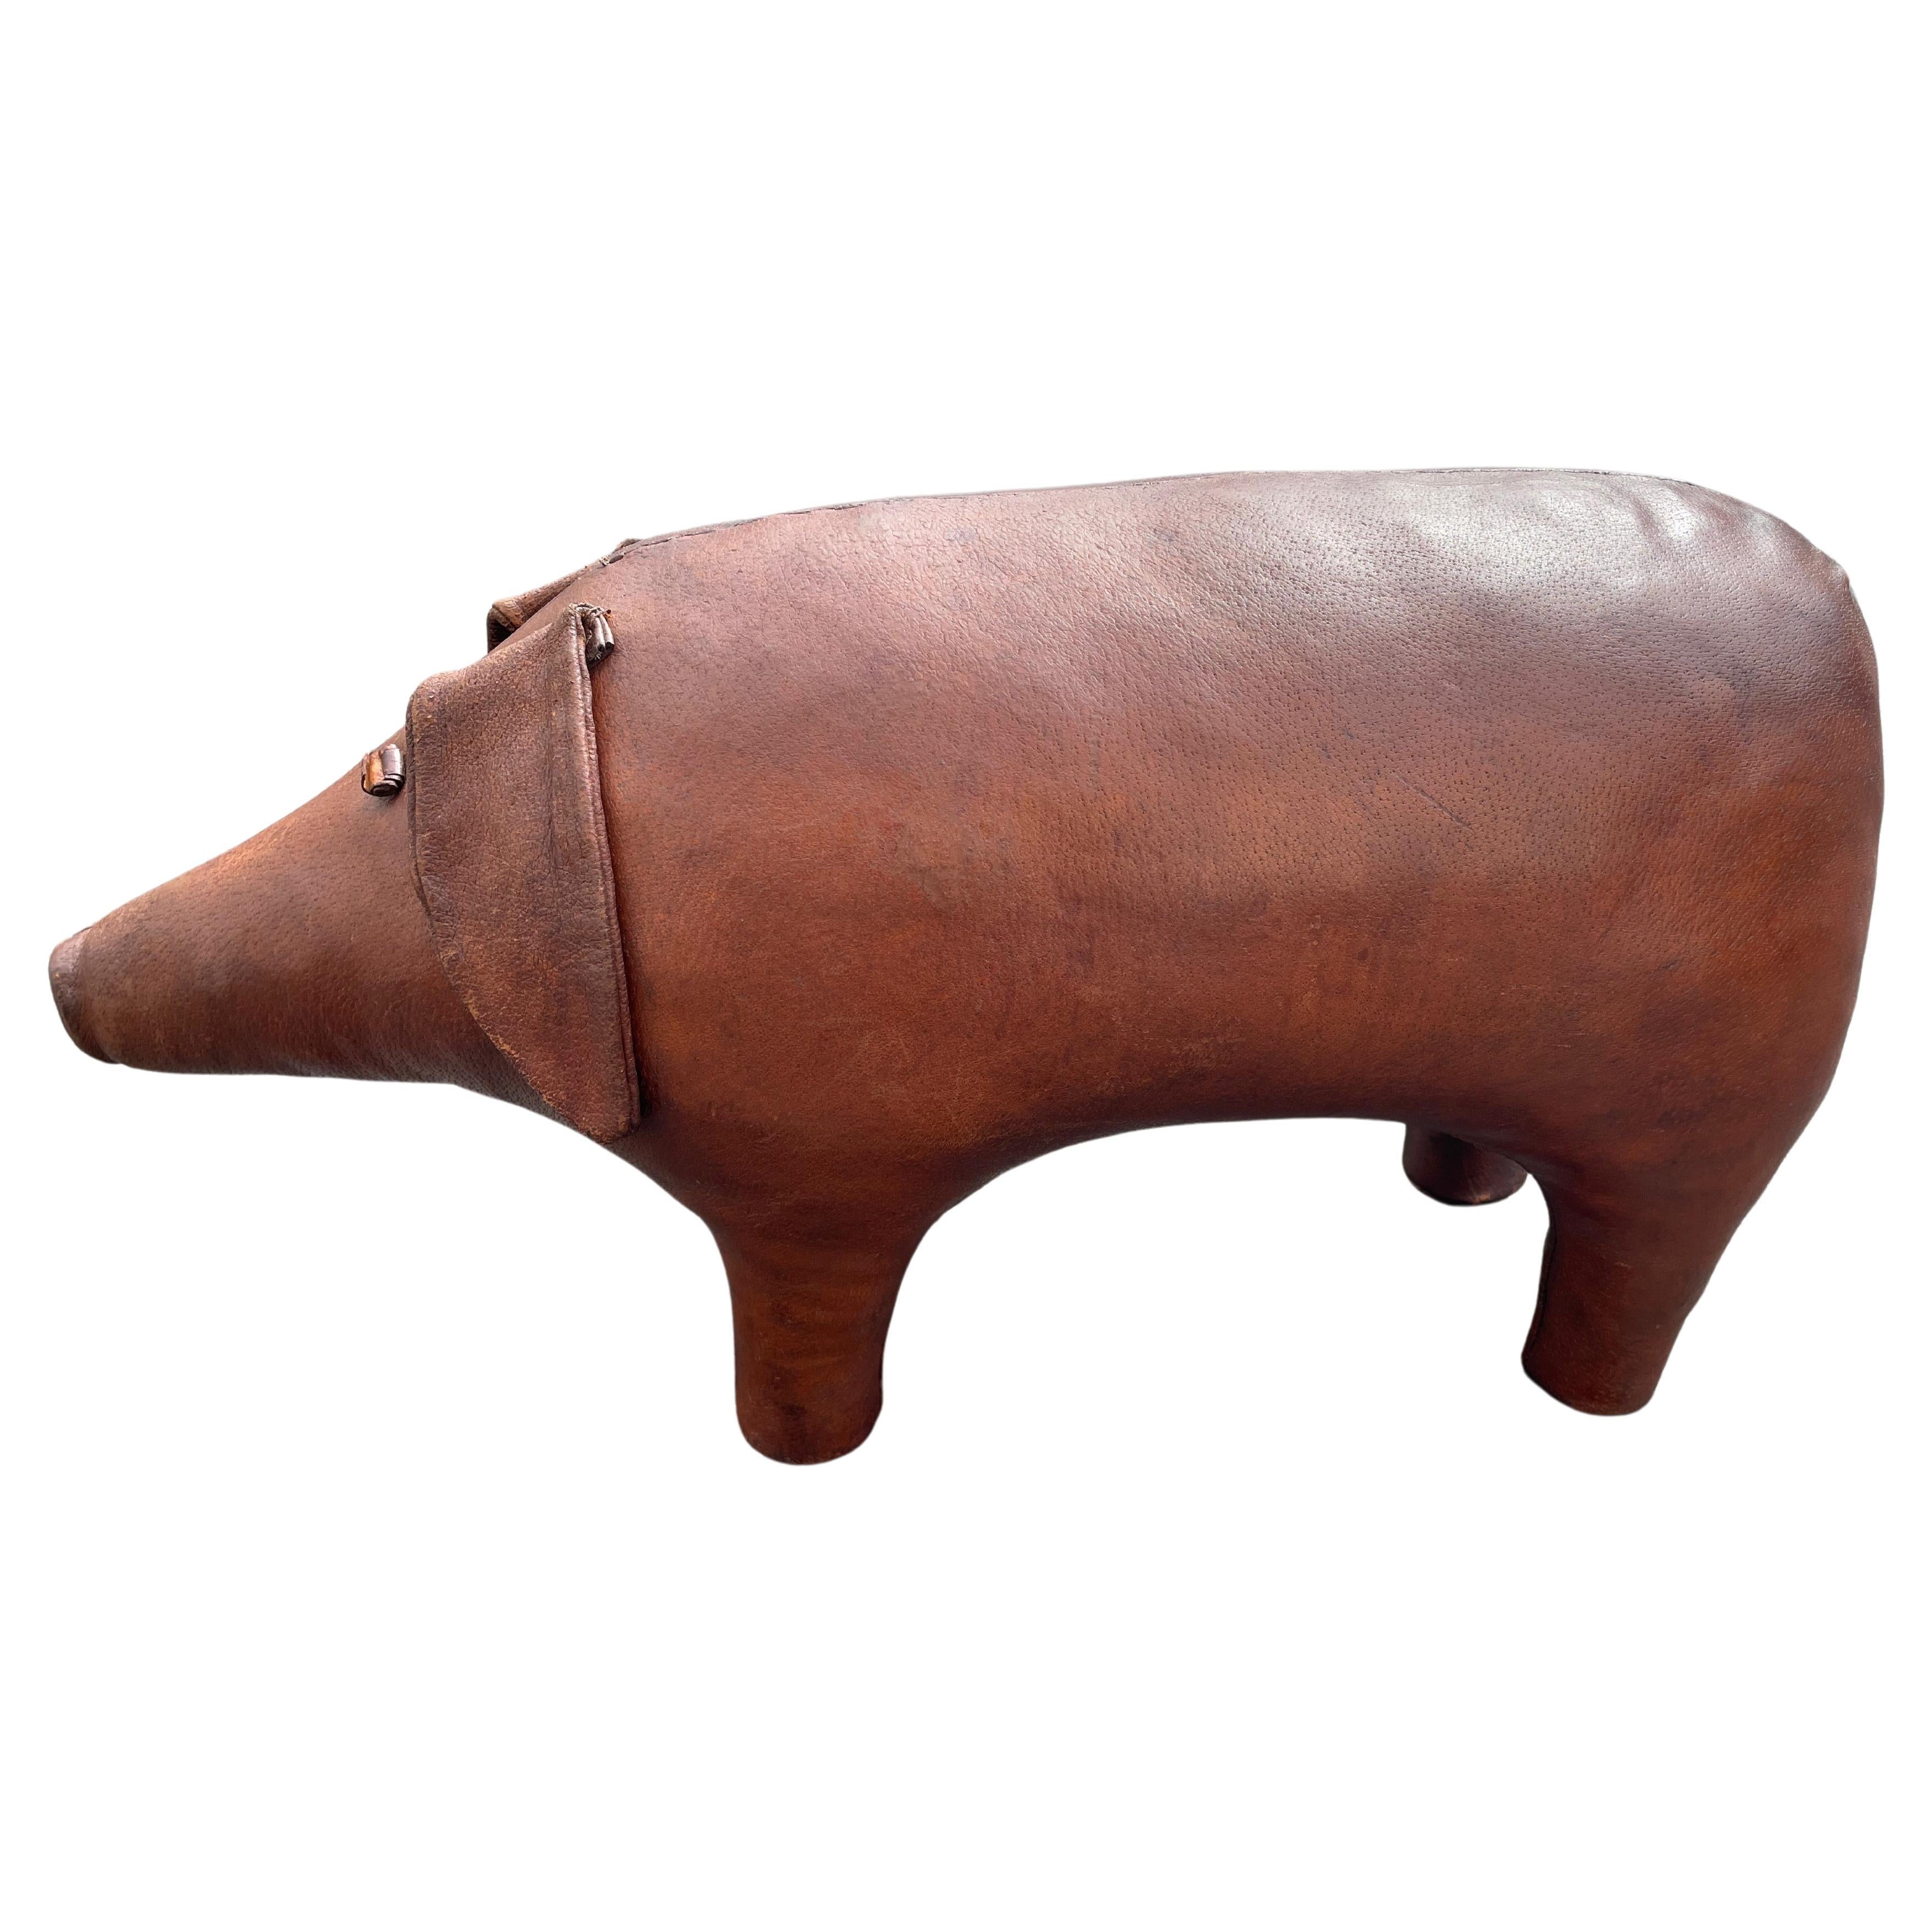 Large footstool "PIG" by Dimitri Omersa. 1960s. Abercrombie & Fitch